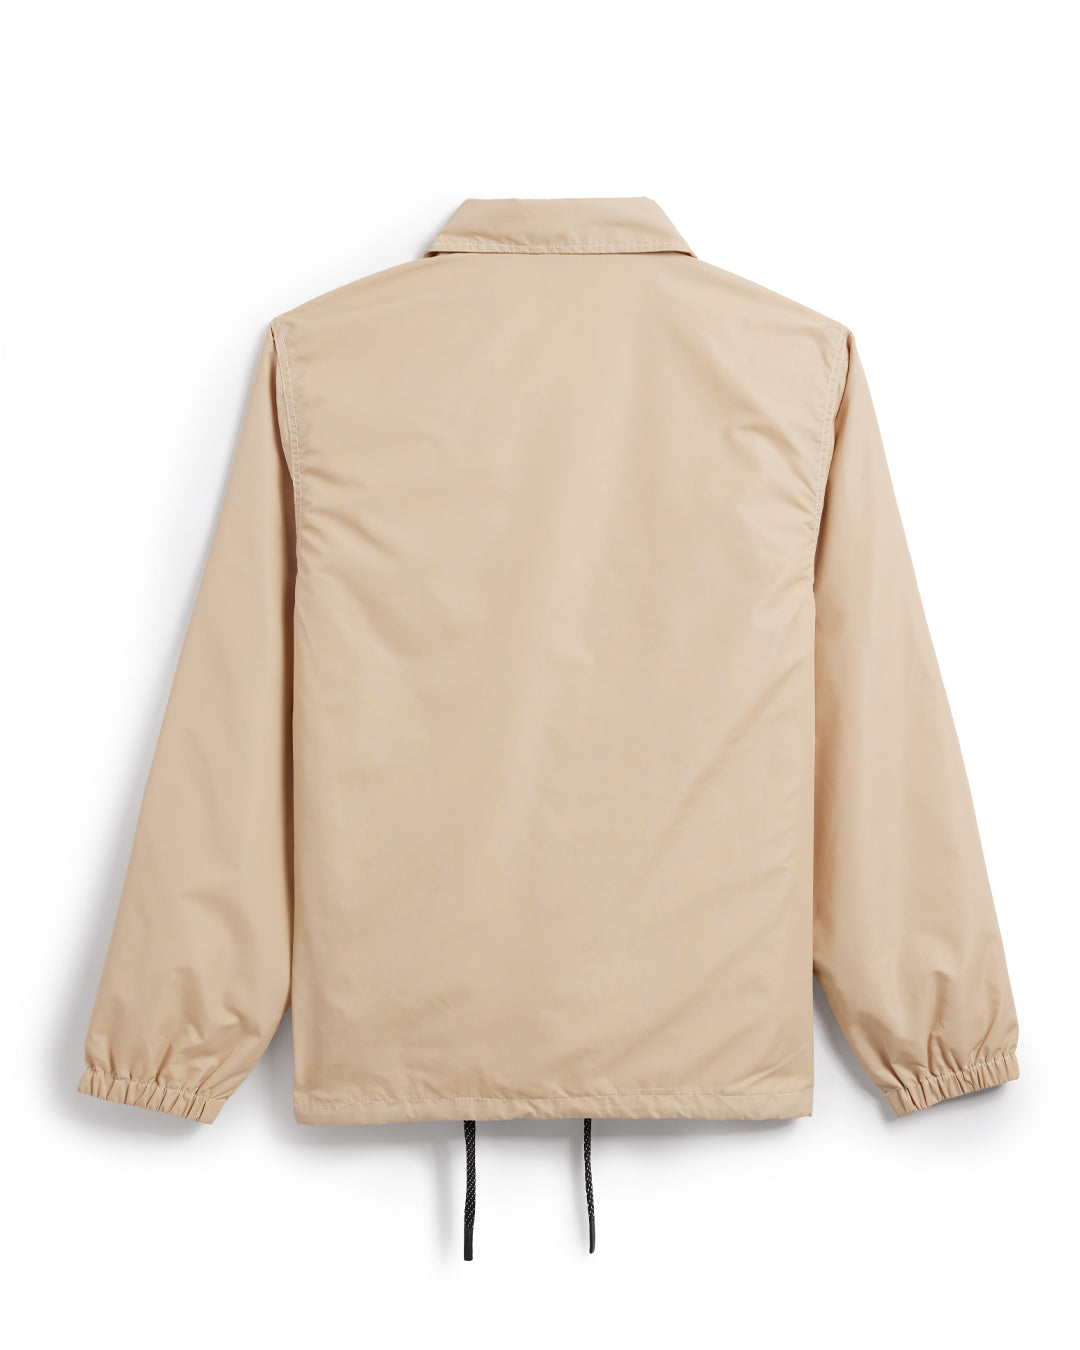 Men's Jackets: Surfynl & More – tagged 